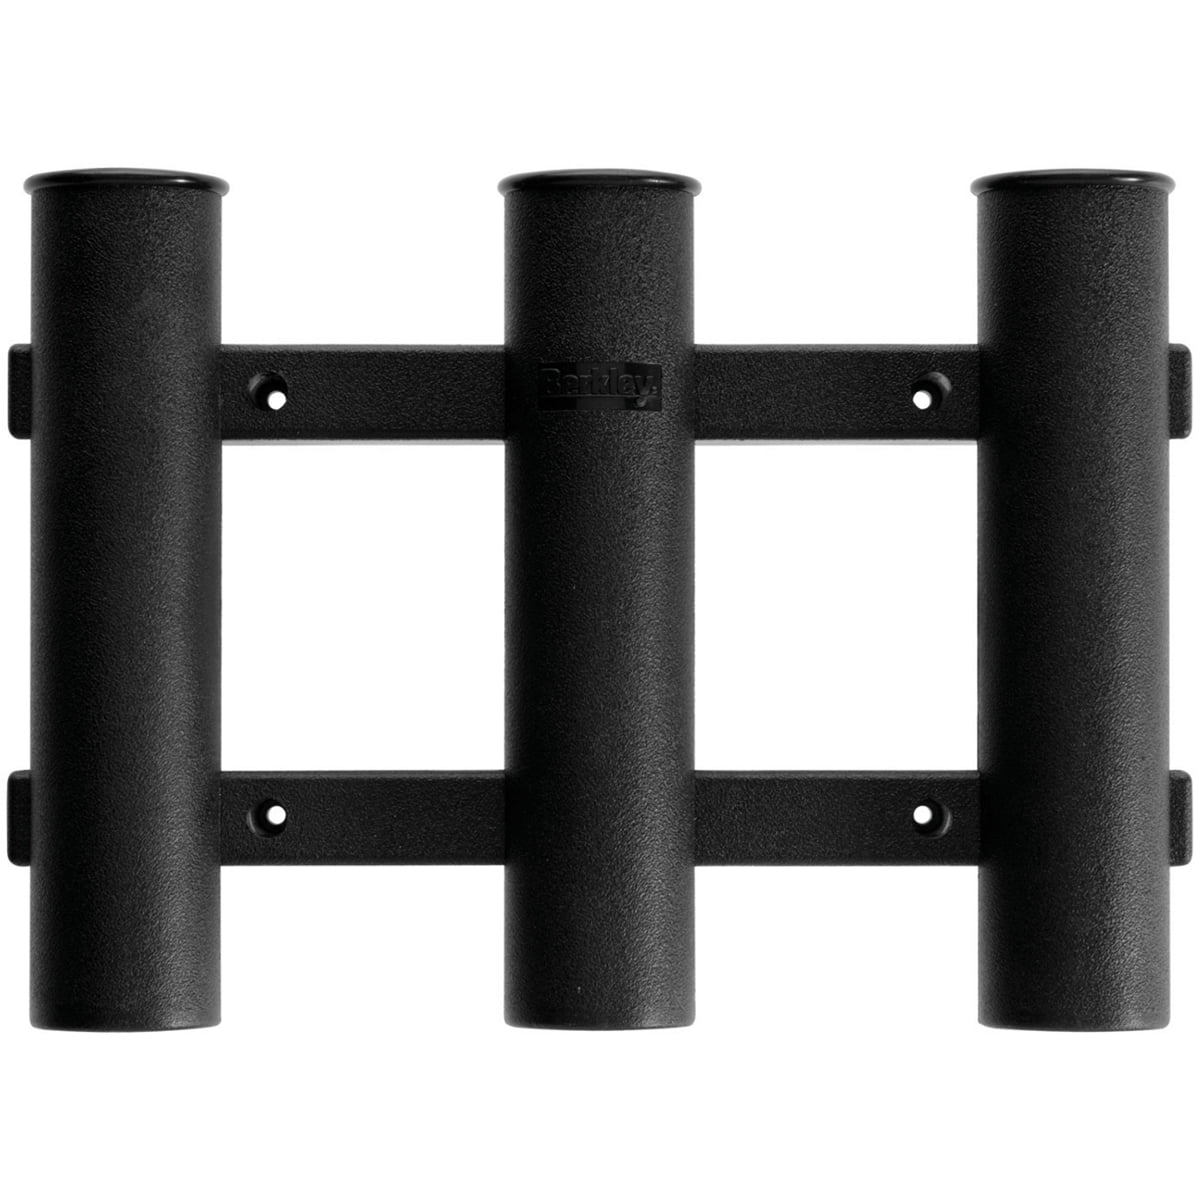 Berkley Tube Rod Rack - Black -Storage for Fishing Rods and Combos 